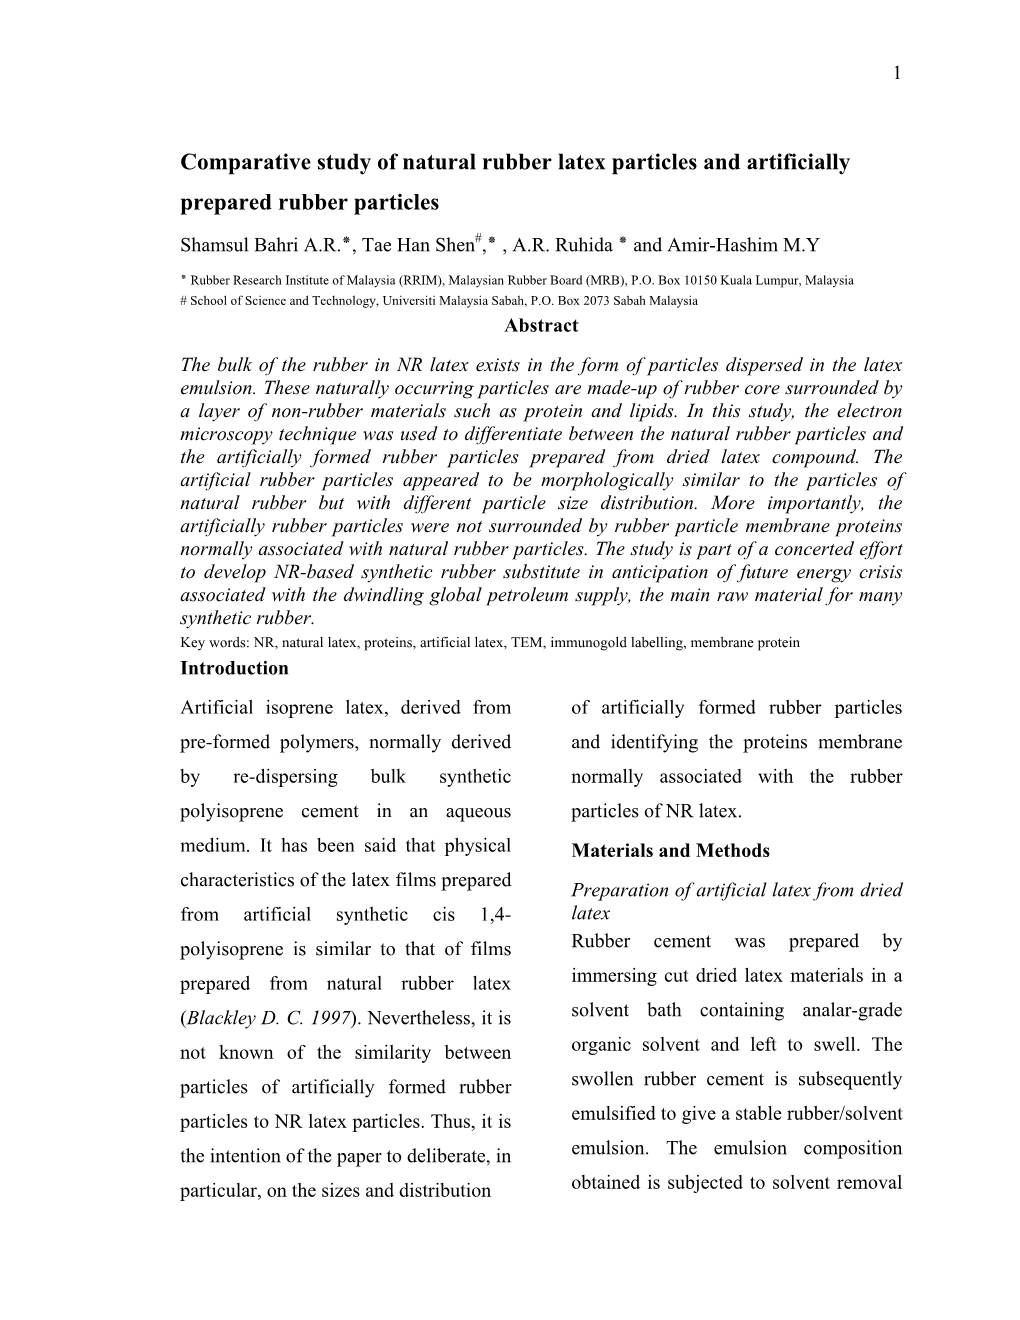 Comparative Study of Natural Rubber Latex Particles and Artificially Prepared Rubber Particles